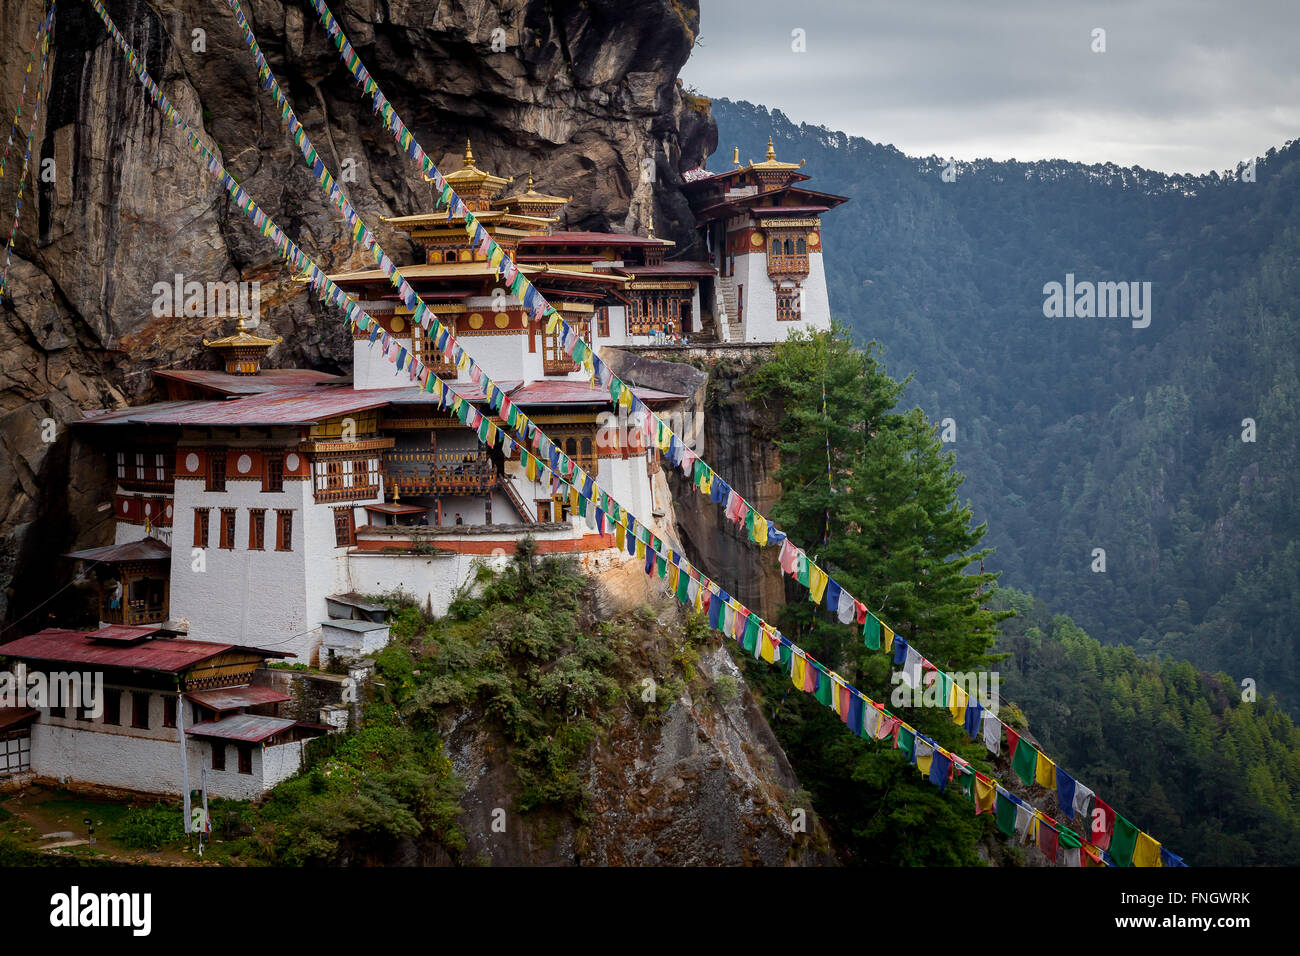 Paro Taktsang, also known as the Tiger's Nest is a sacred Vajrayana Himalayan Buddhist site located in the cliffside of Paro valley in Bhutan. Stock Photo